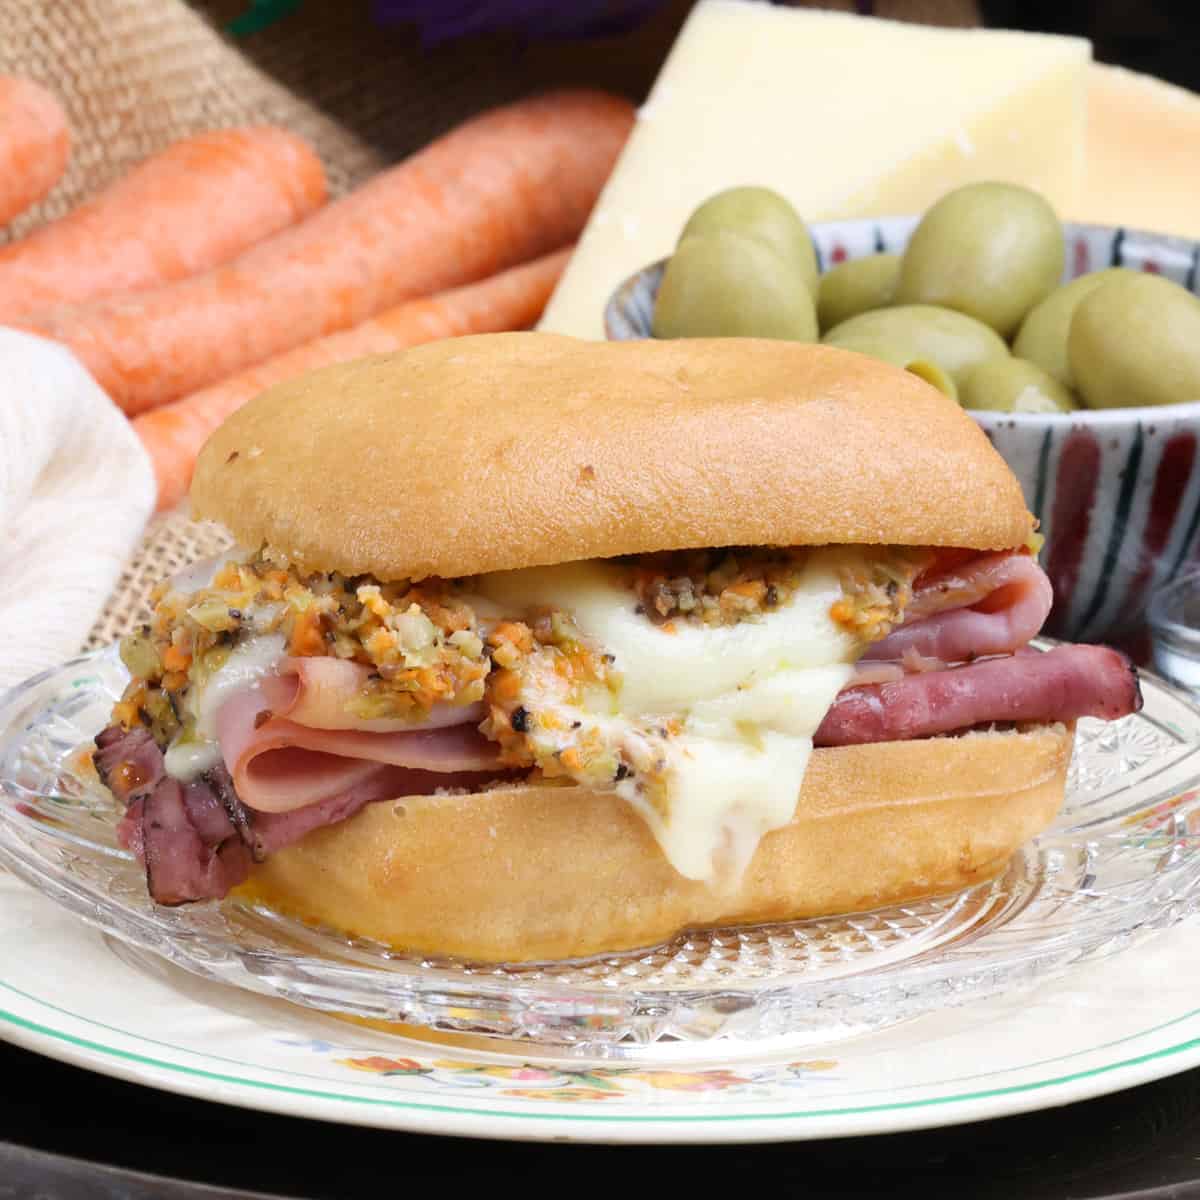 a single muffuletta sandwich with cheese melted and dripping down the sides.